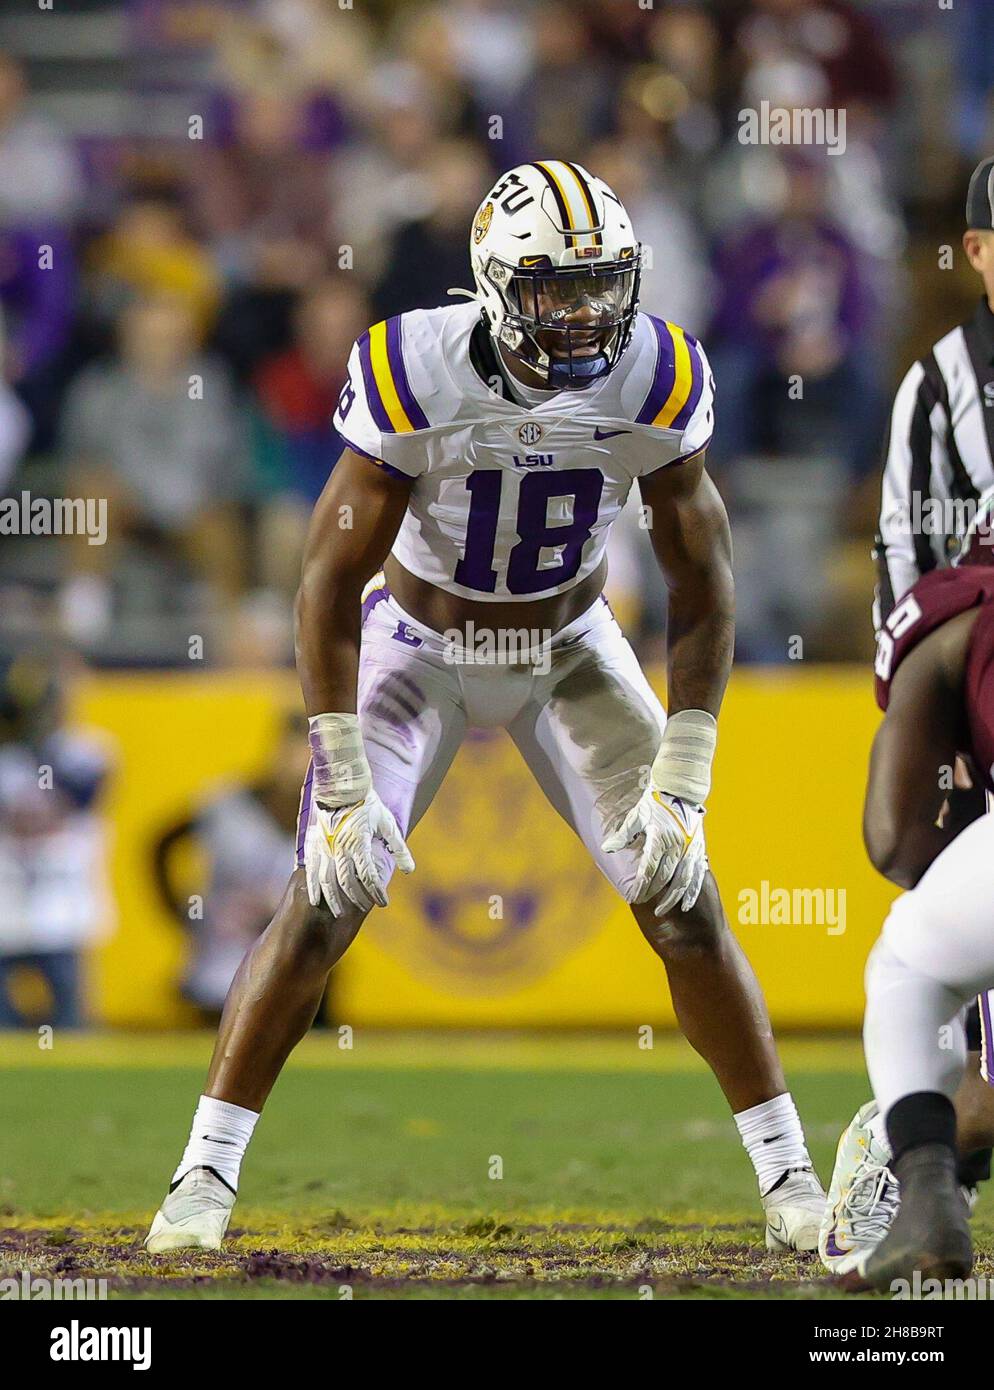 Baton Rouge, LA, USA. 27th Nov, 2021. LSU linebacker Damone Clark #18 lines up close to the LOS during the NCAA football game between the LSU Tigers and the Texas A&M Aggies at Tiger Stadium in Baton Rouge, LA. Kyle Okita/CSM/Alamy Live News Stock Photo